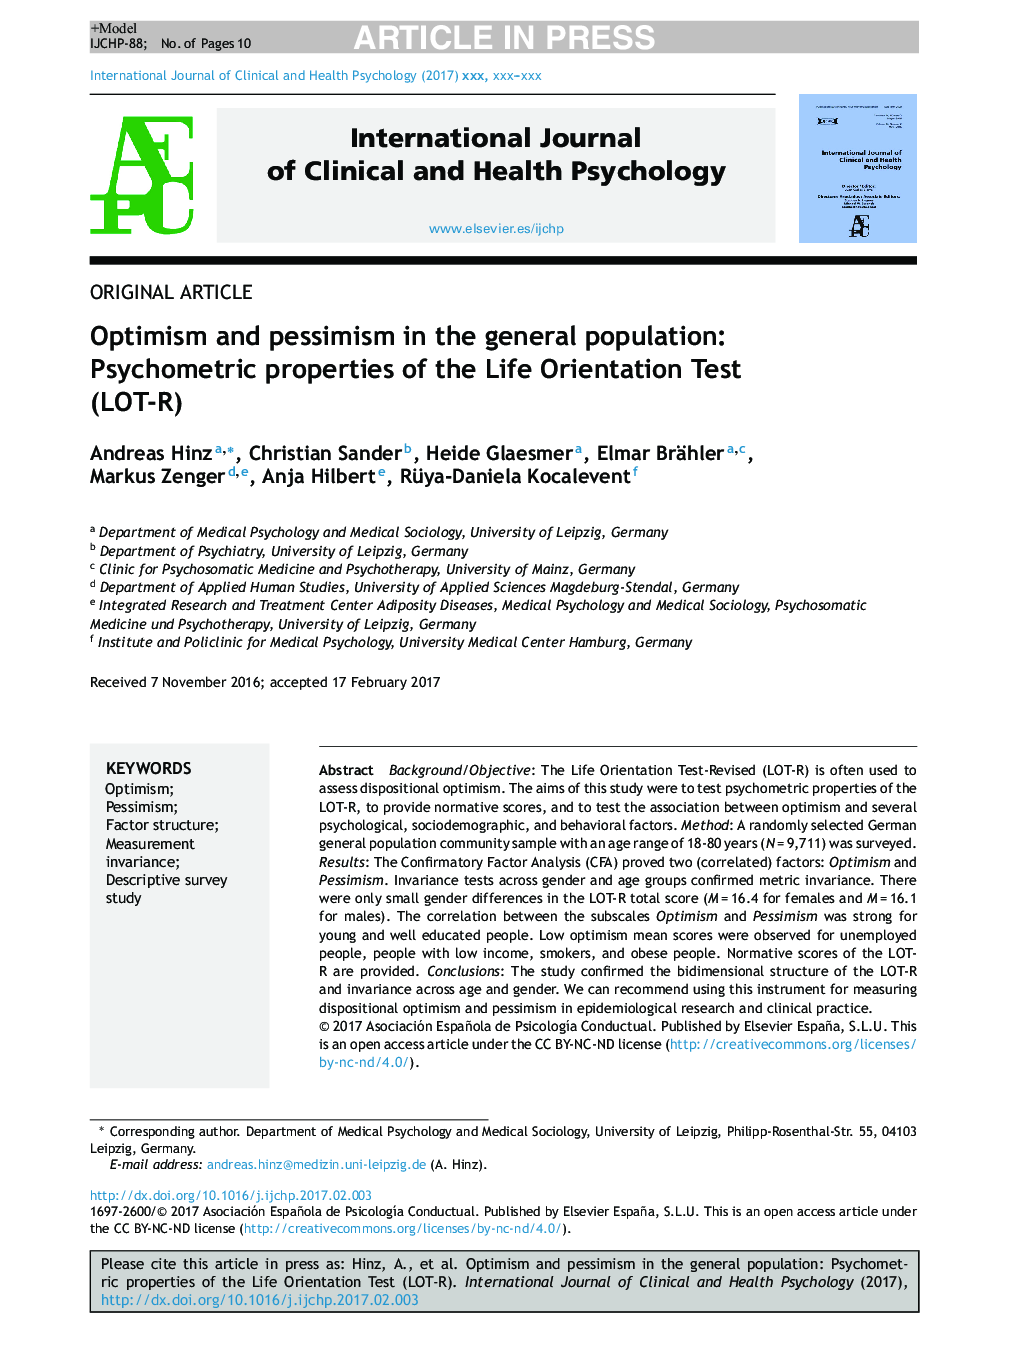 Optimism and pessimism in the general population: Psychometric properties of the Life Orientation Test (LOT-R)